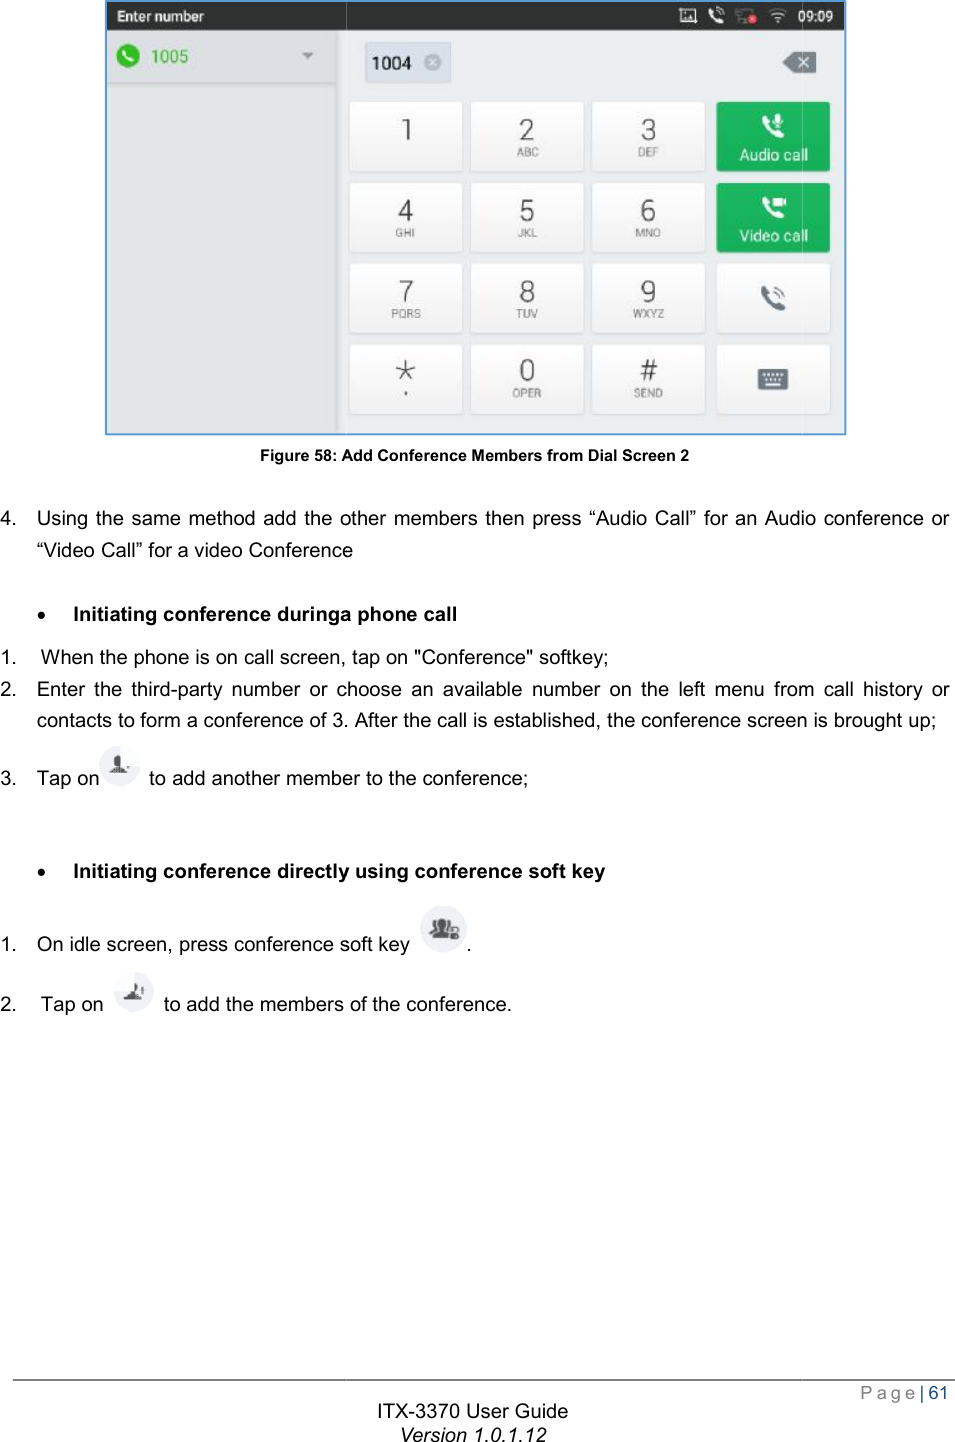   Figure 58: Add Conference Members from Dial Screen  4. Using the same method add the other members then press “Video Call” for a video Conference · Initiating conference duringa1. When the phone is on call screen, tap on &quot;Conference&quot; softkey2. Enter the third-party number or choose an available number on the left menu from call history or contacts to form a conference of 3. After3. Tap on  to add another member to the · Initiating conference directly using conference soft key1. On idle screen, press conference soft key 2. Tap on   to add the members of the ITX-3370 User Guide Version 1.0.1.12 Add Conference Members from Dial Screen 2 Using the same method add the other members then press “Audio Call” for an Audio conference or o Conference Initiating conference duringa phone call When the phone is on call screen, tap on &quot;Conference&quot; softkey; or choose an available number on the left menu from call history or . After the call is established, the conference screen is brought up;member to the conference; Initiating conference directly using conference soft key On idle screen, press conference soft key . the members of the conference.  Page| 61  for an Audio conference or or choose an available number on the left menu from call history or the call is established, the conference screen is brought up; 